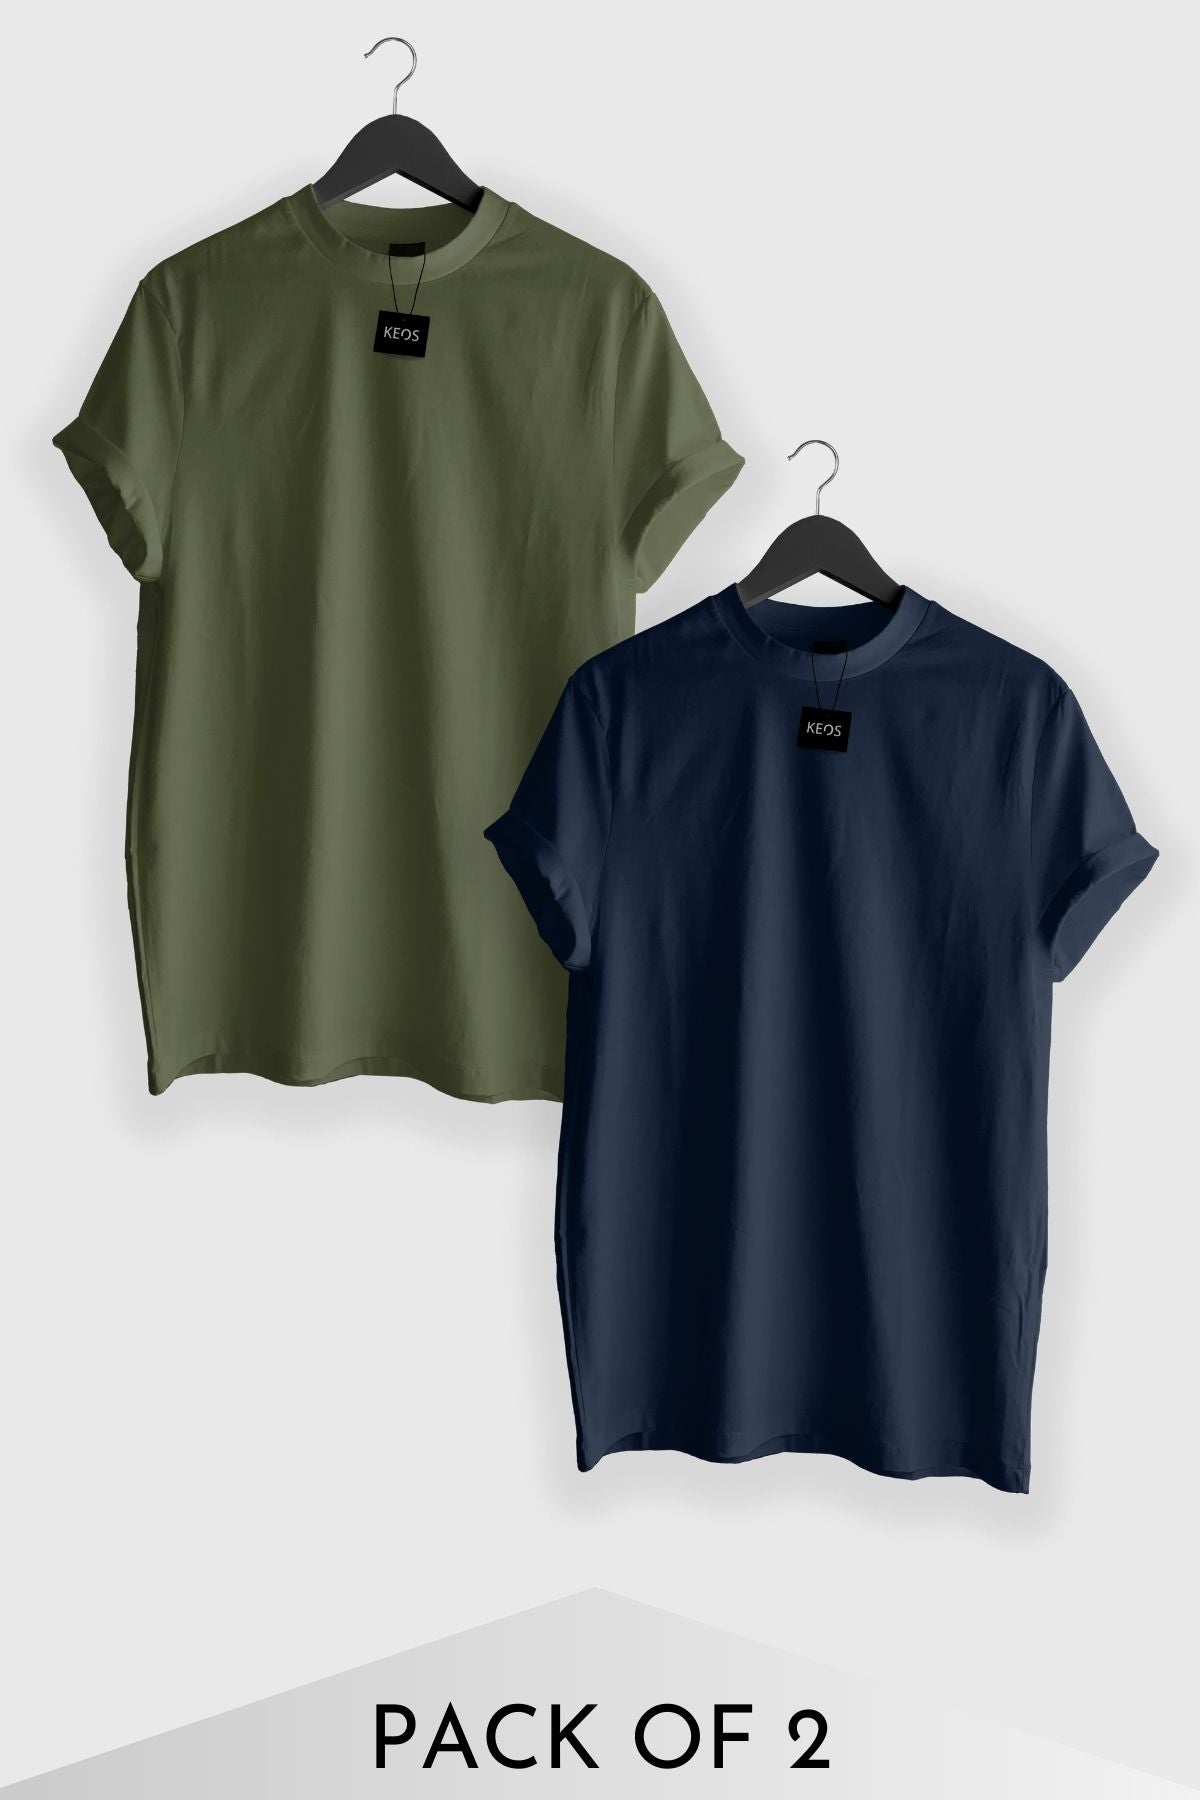 Basic Essentials T-shirts - Olive & Navy - Pack of 2 - keos.life